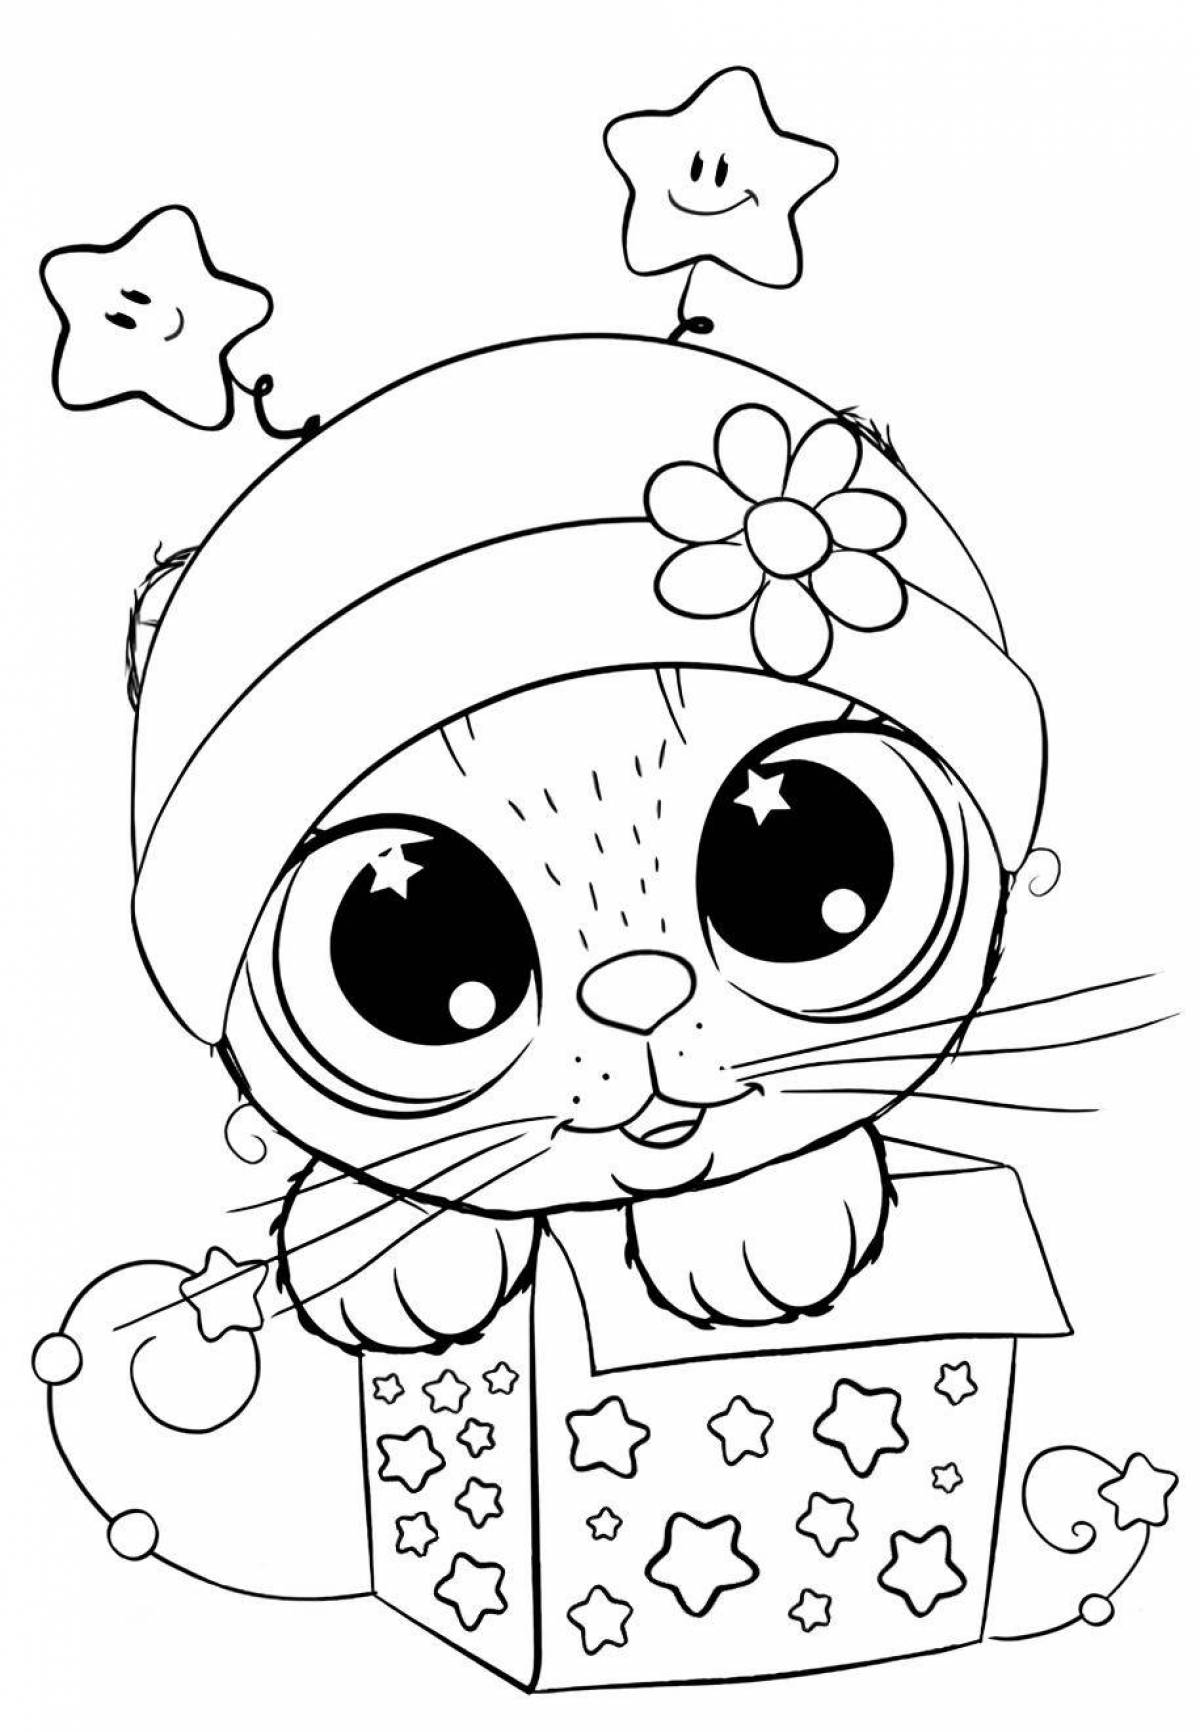 Funny coloring book the cutest in the world